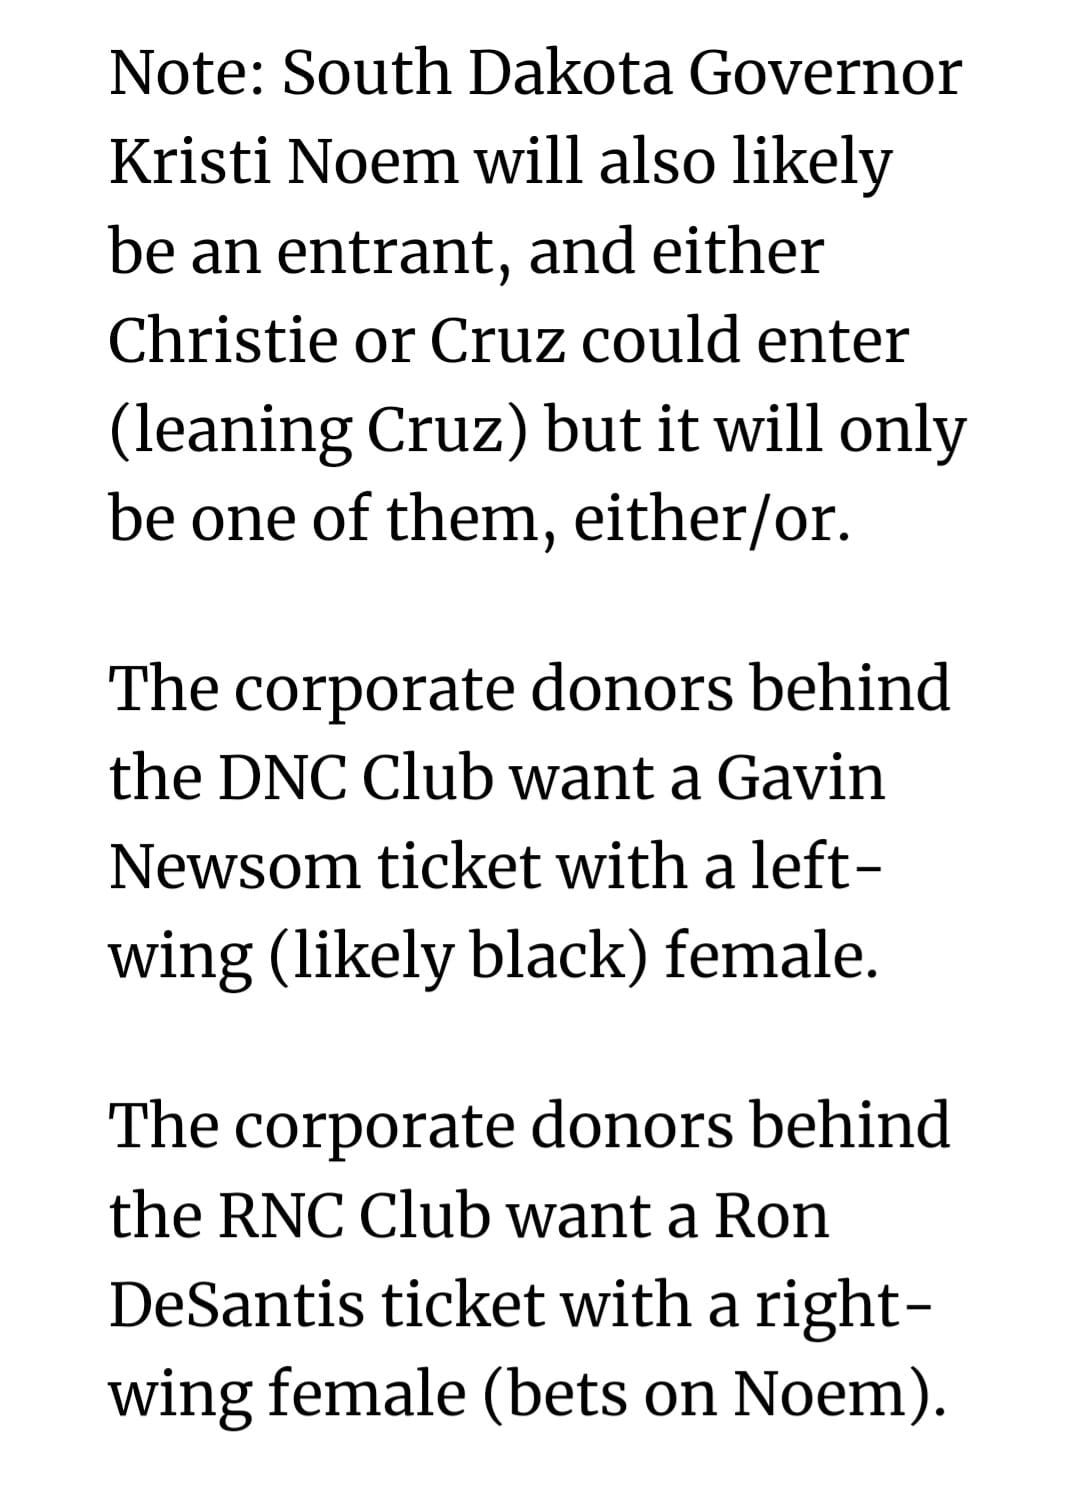 May be an image of text that says 'Note: South Dakota Governor Kristi Noem will also likely be an entrant, and either Christie or Cruz could enter (leaning Cruz) but it will only be one of them, either/or. The corporate donors behind the DNC Club want a Gavin Newsom ticket with a left- wing (likely black) female. The corporate donors behind the RNC Club want a Ron DeSantis ticket with a right- wing female (bets on Noem).'